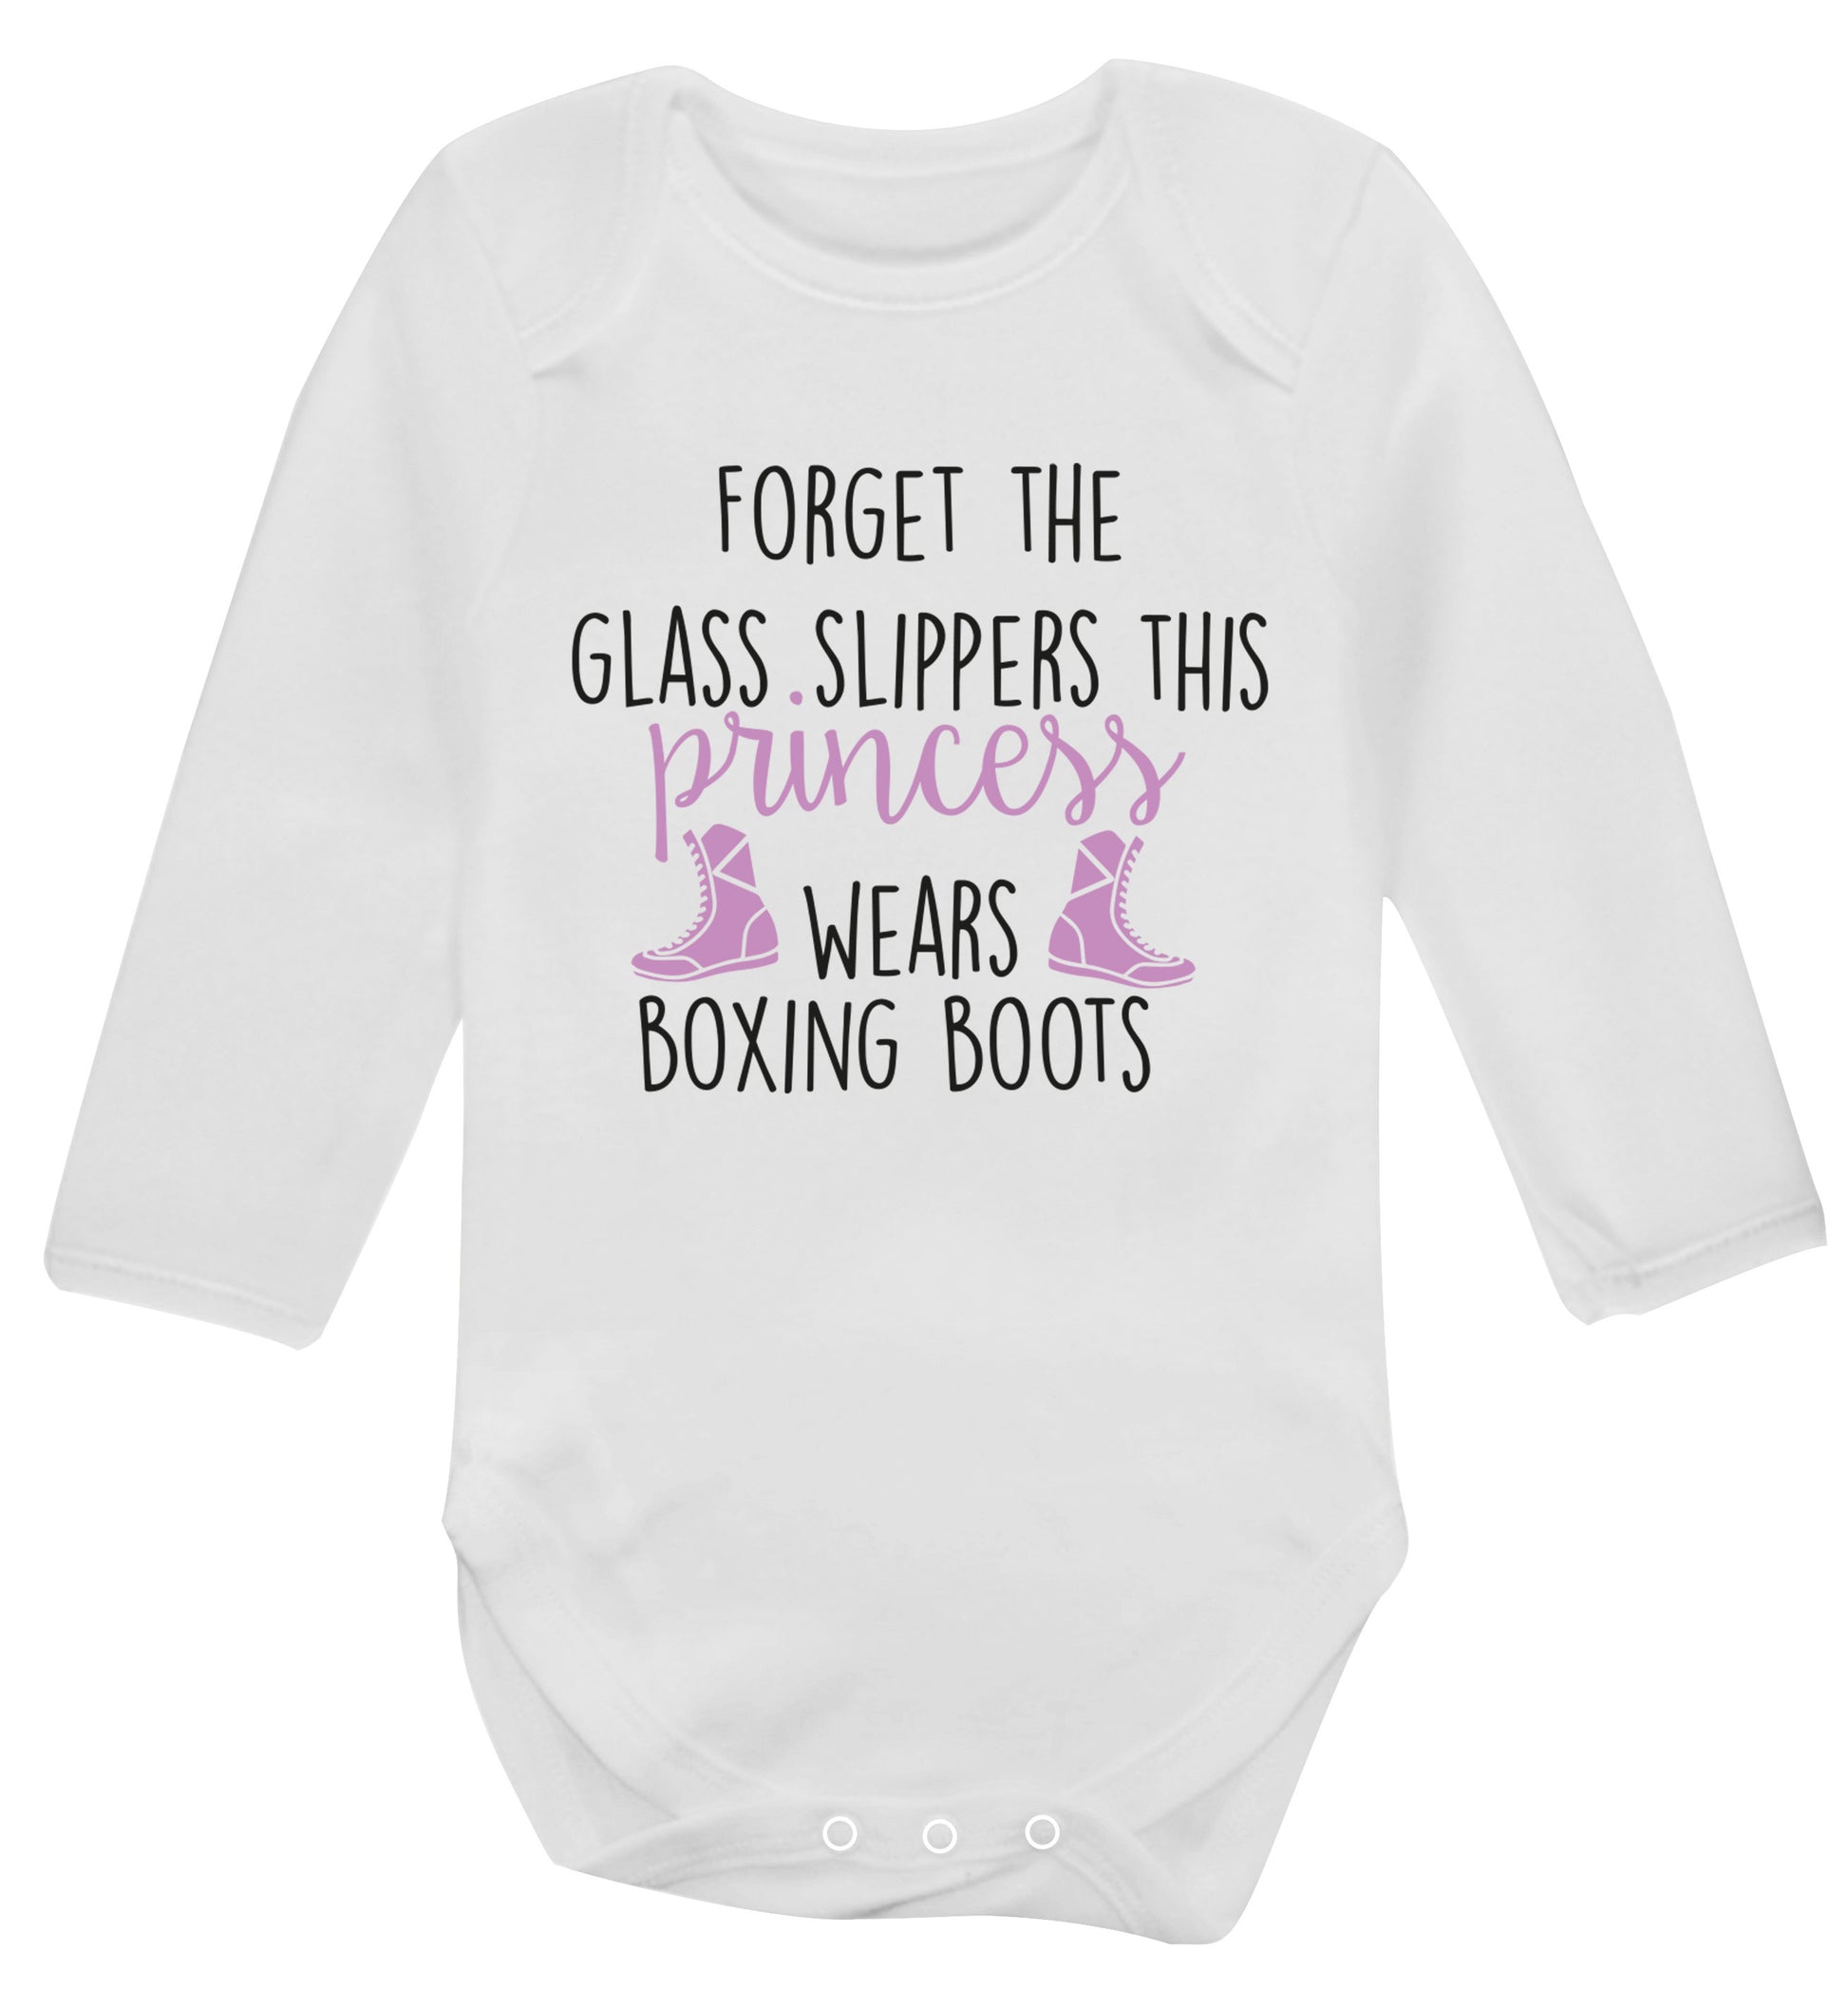 Forget the glass slippers this princess wears boxing boots Baby Vest long sleeved white 6-12 months